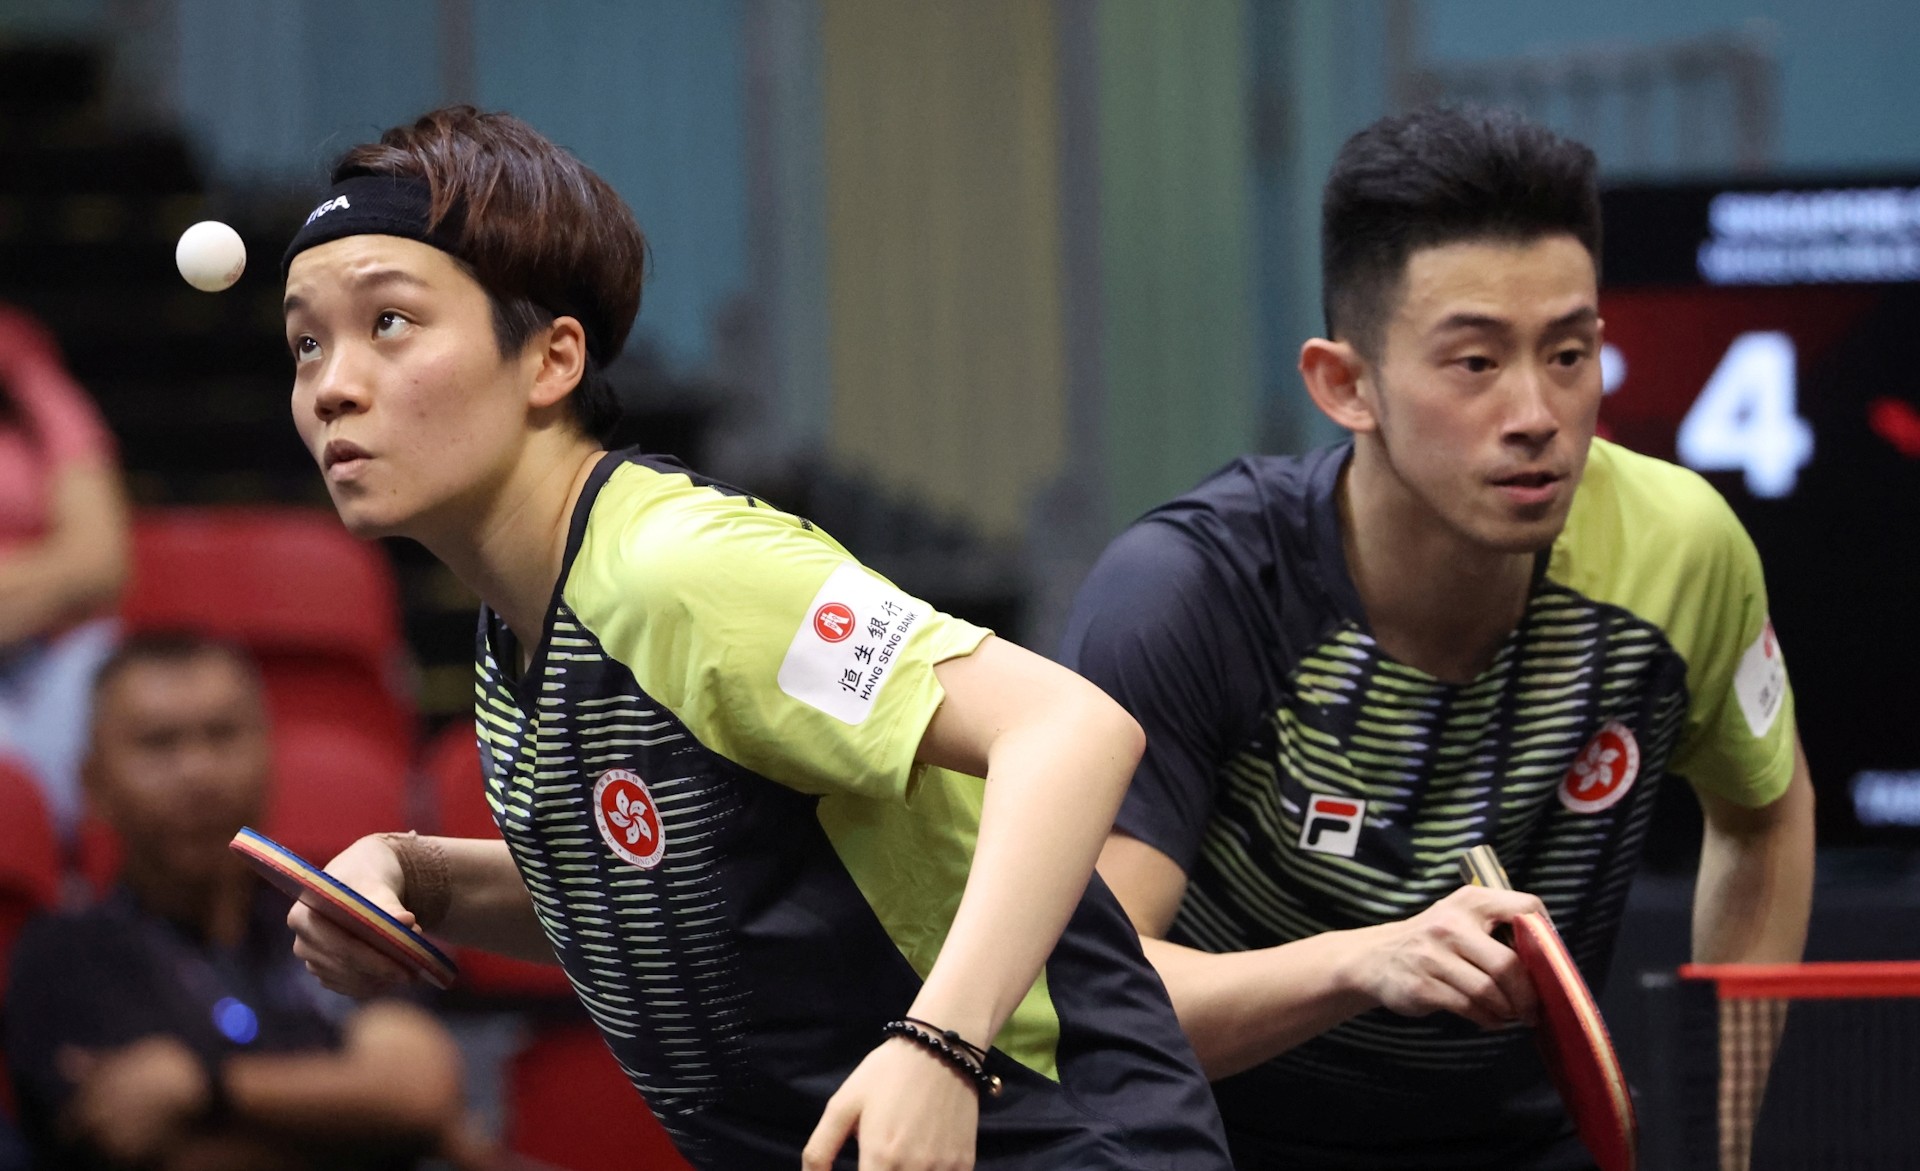 Doo Hoi-kem (left) and Wong Chun-ting ranked world No 11 in mixed doubles. Photo: Handout